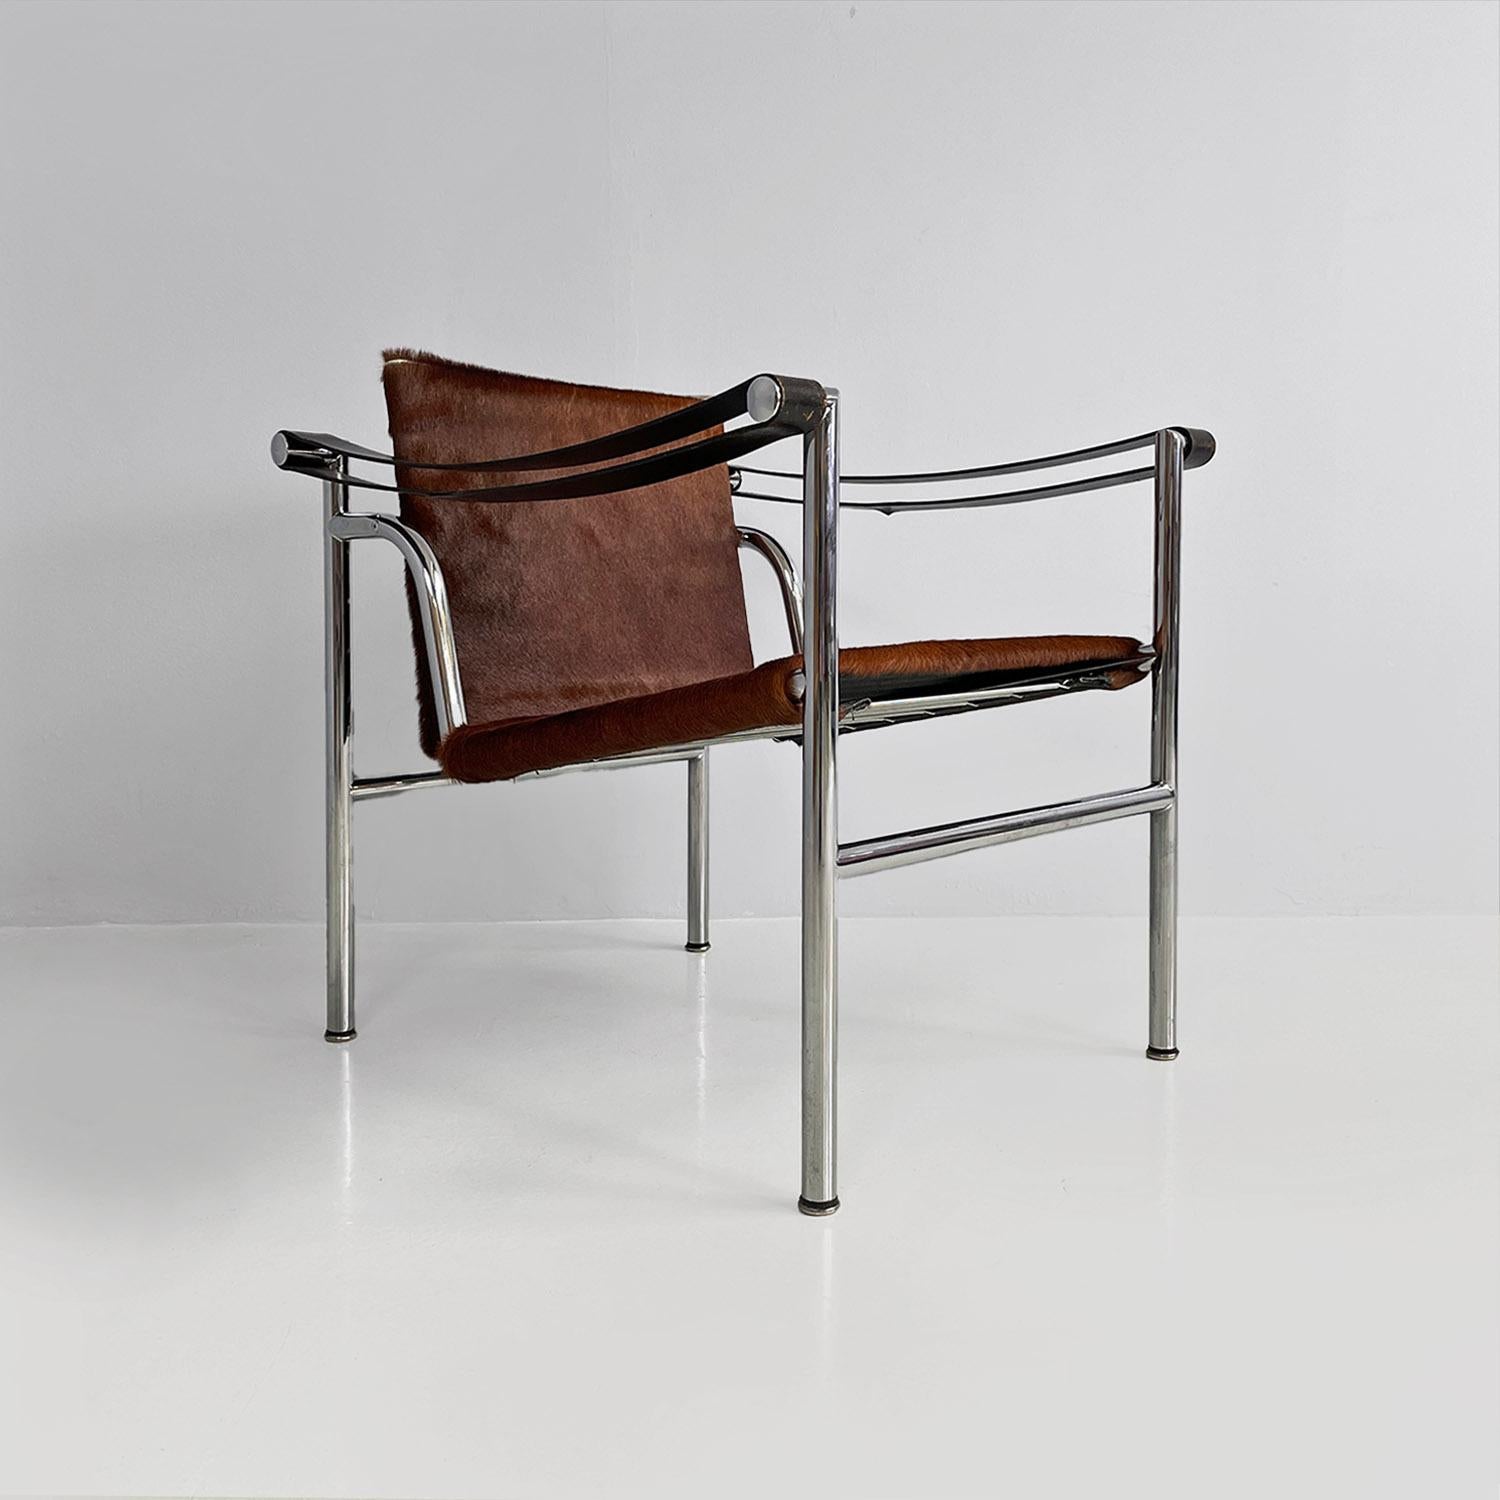 Small armchair, model LC1, with chromed metal rod structure, with tilting backrest and seat covered in brown pony hair, with armrests made of two continuous strips of black leather.
Designed by Le Corbusier, Pierre Jeanneret and Charlotte Perriand